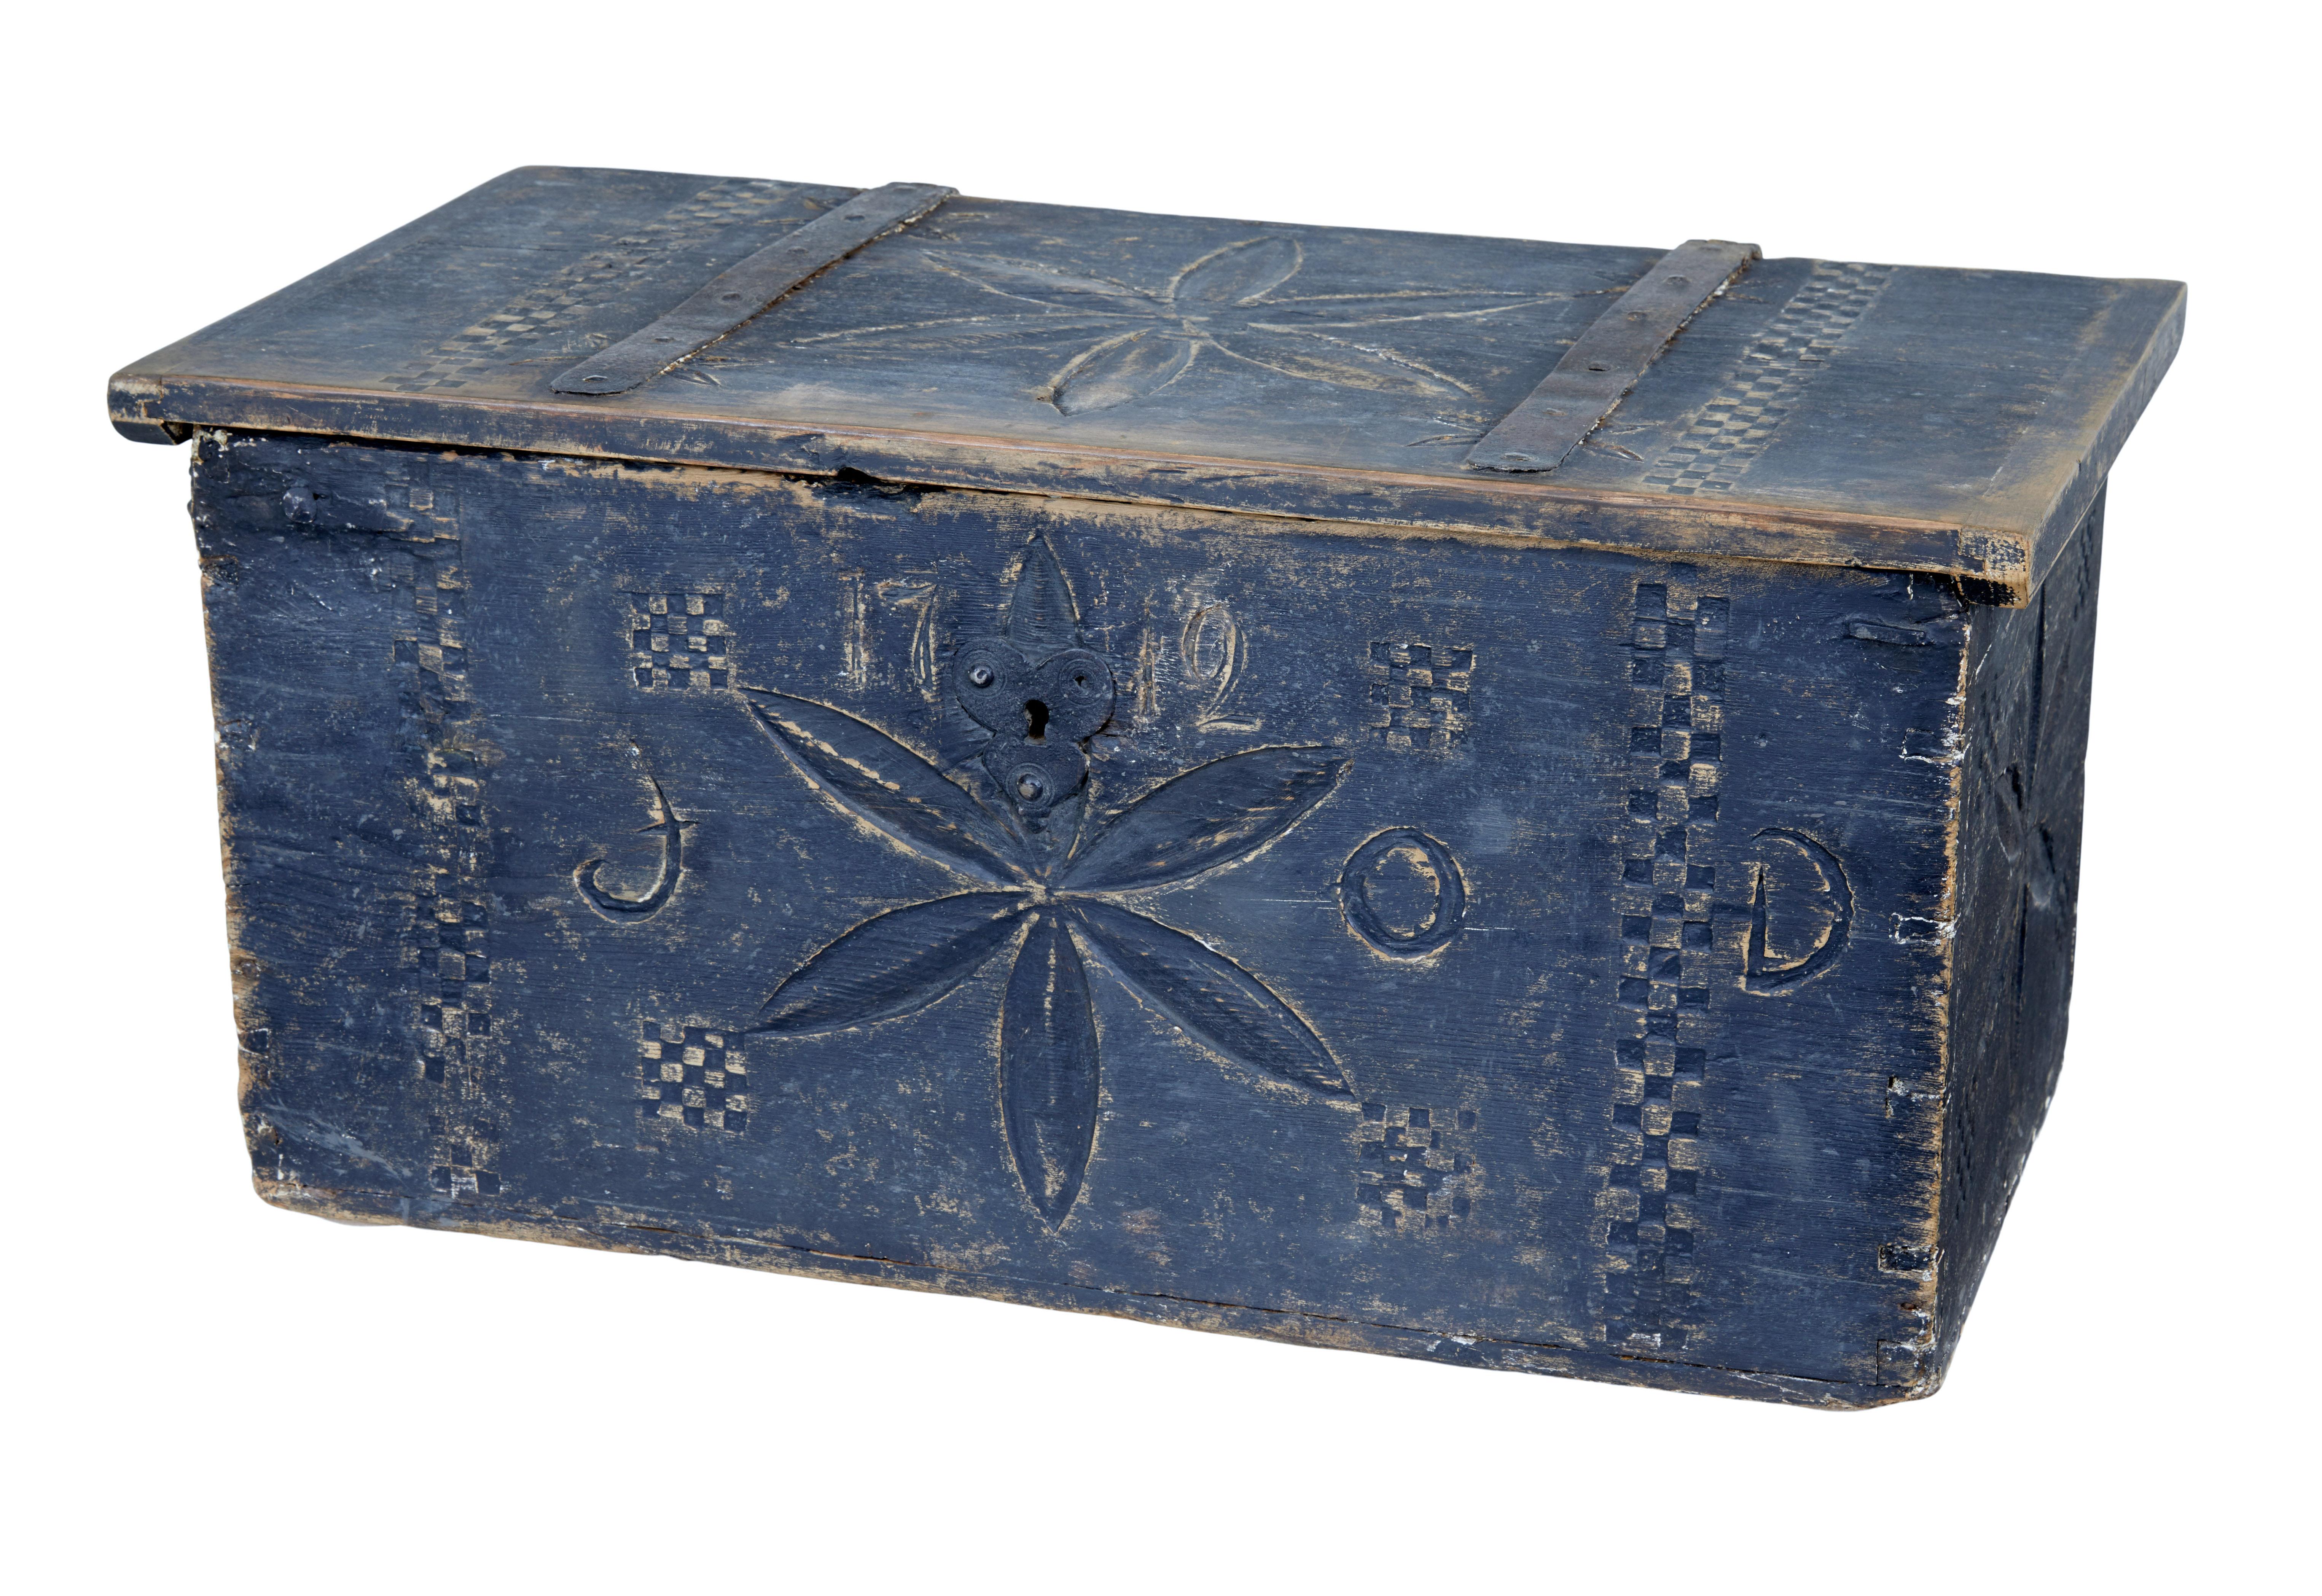 Swedish 18th century carved pine painted chest circa 1712.

Beautiful painted rustic hinged box, which at over 300 years old is still ready for everyday use.

Dated 1712 on the front, also with the initials j o d. Hand carved on all surfaces